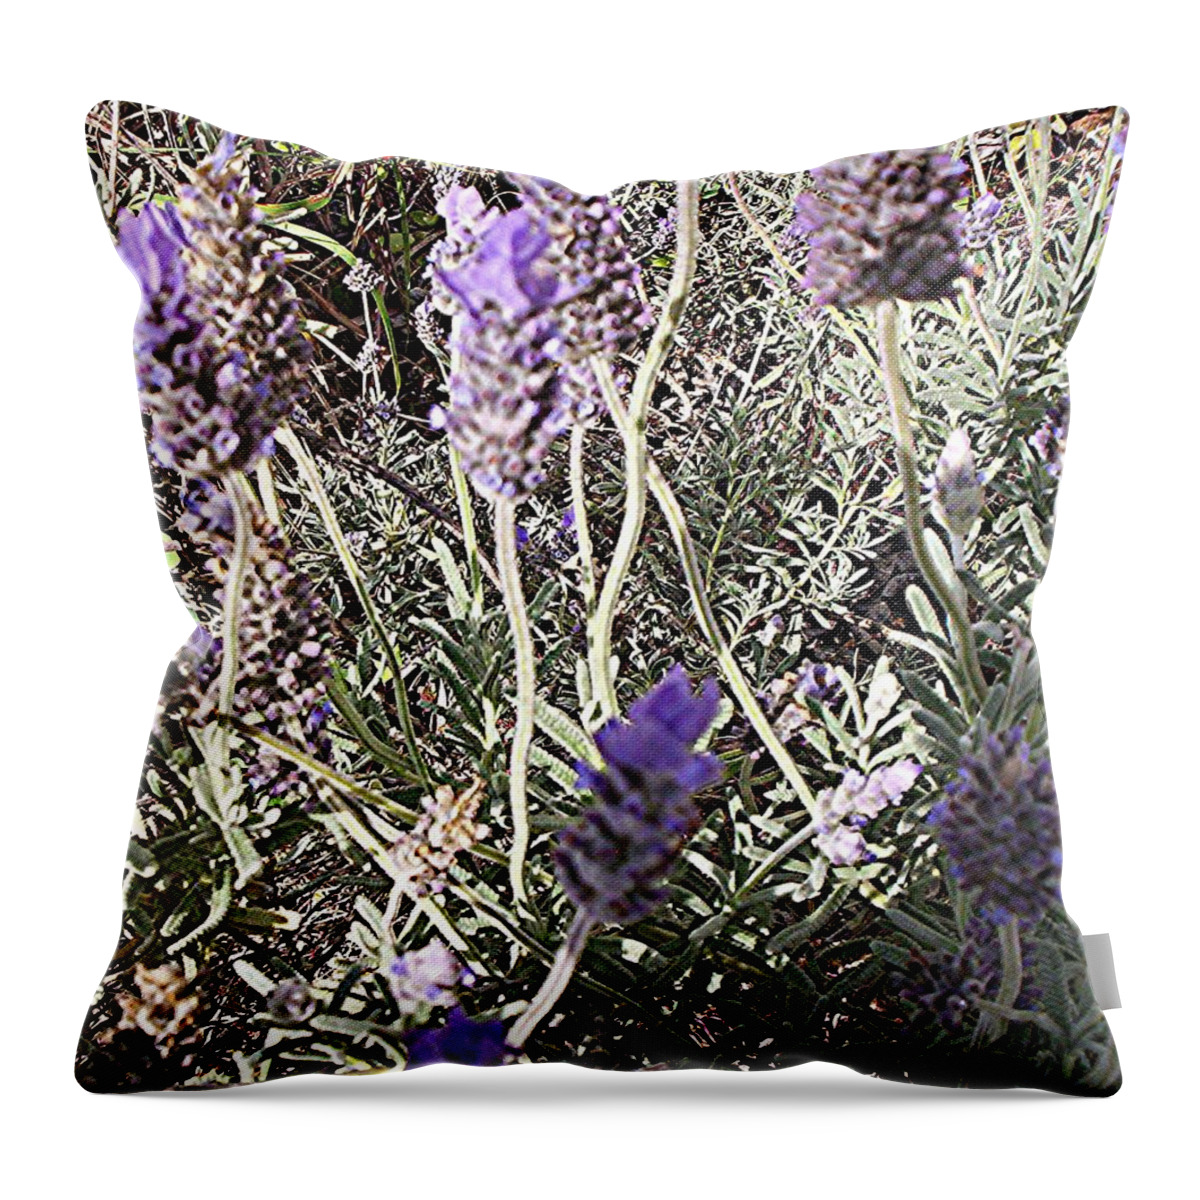 Lavender Throw Pillow featuring the digital art Lavender Moment by Winsome Gunning